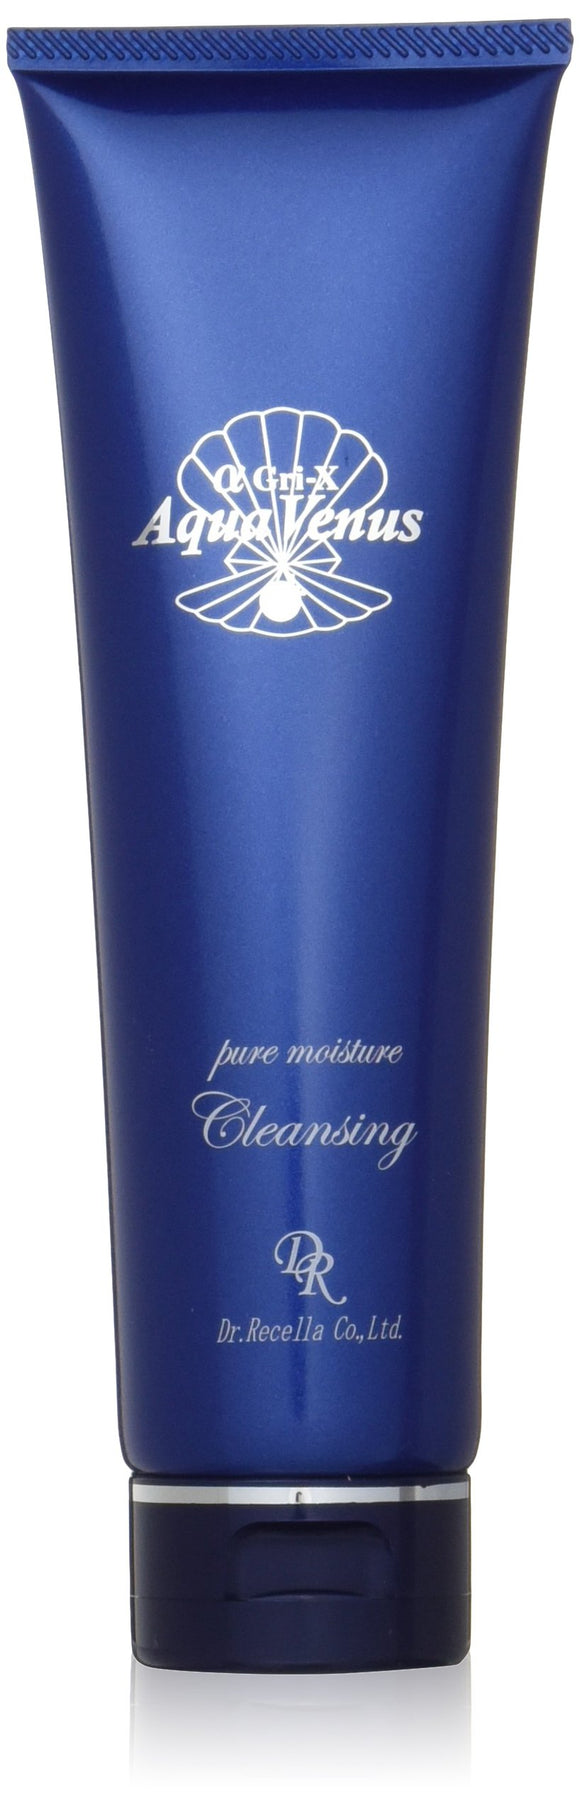 Dr. Resera Pure Moisture Cleansing 150g